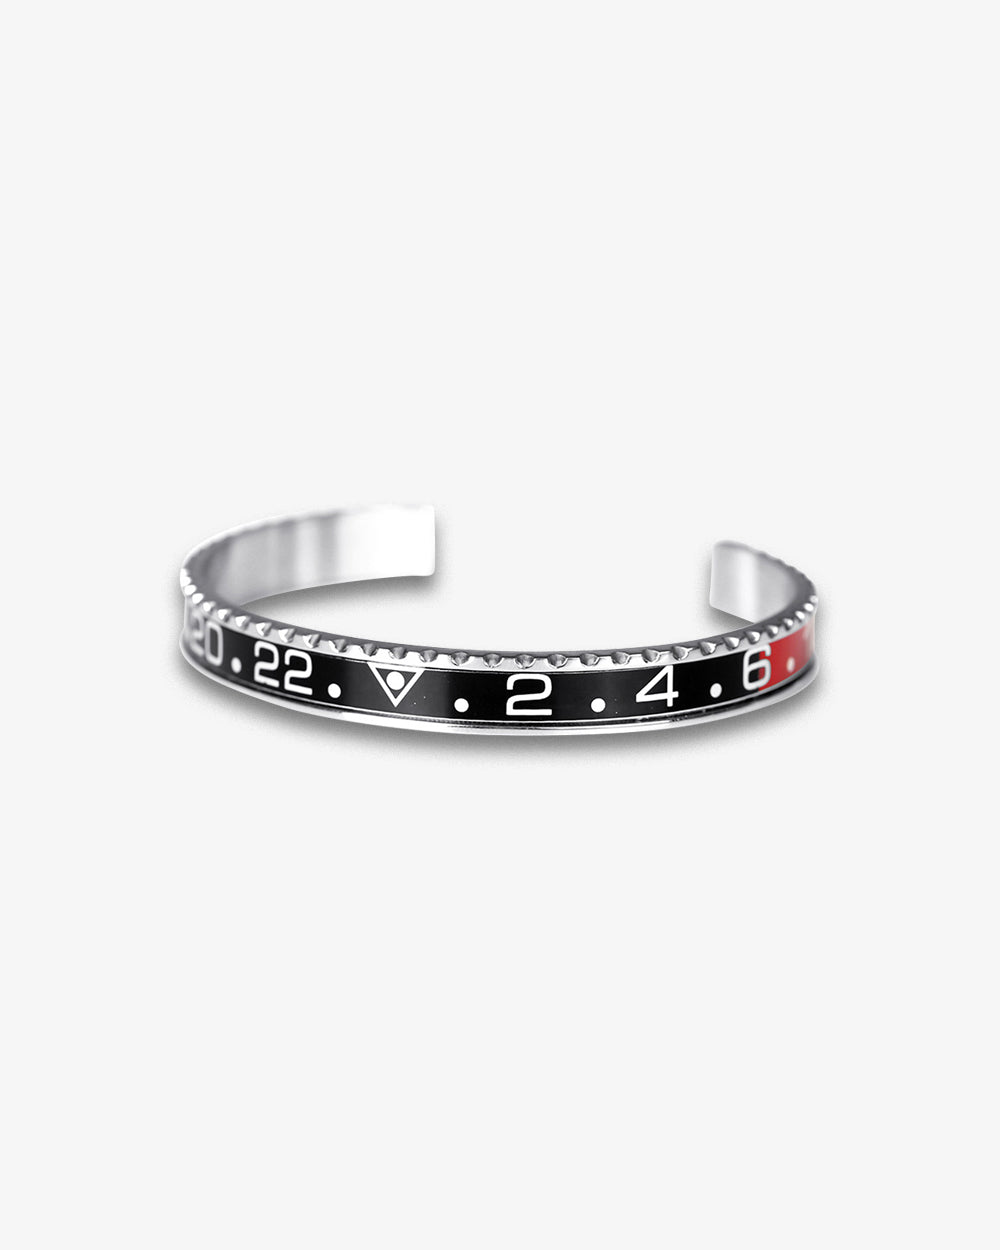 Swiss Concept Classic Dual Time GMT II 'Coke' Speed Bracelet (Stainless Steel) - Stainless Steel